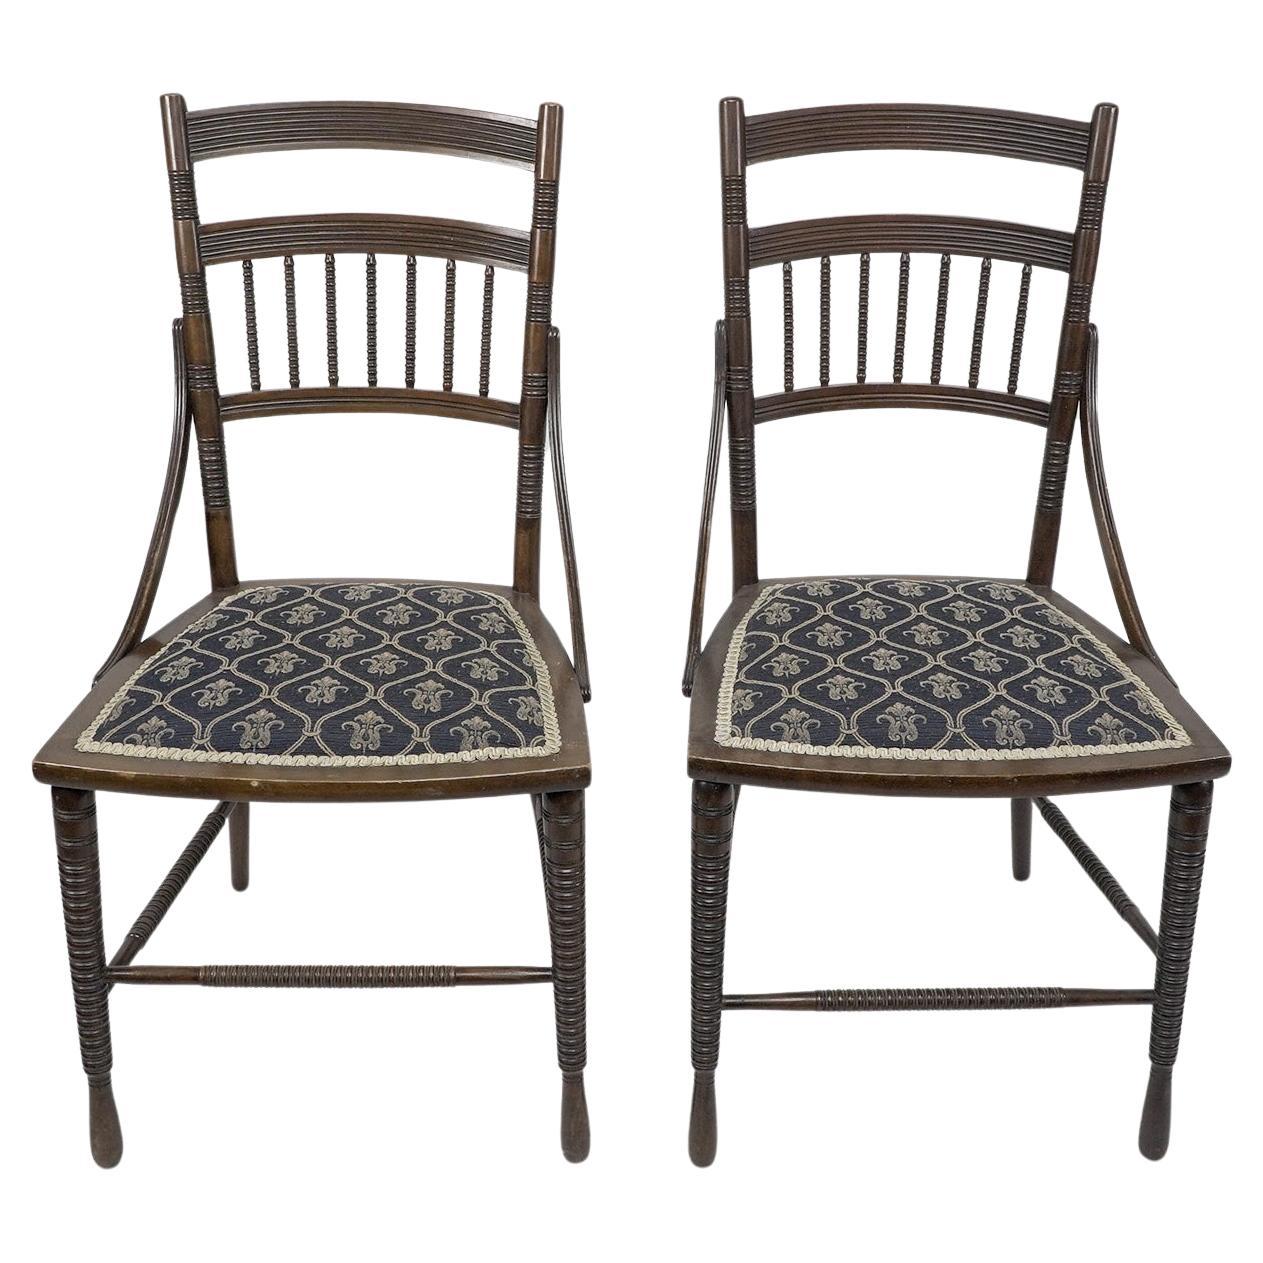 R. W. Edis, probably made by Jackson & Graham A fine pair of Walnut side chairs For Sale